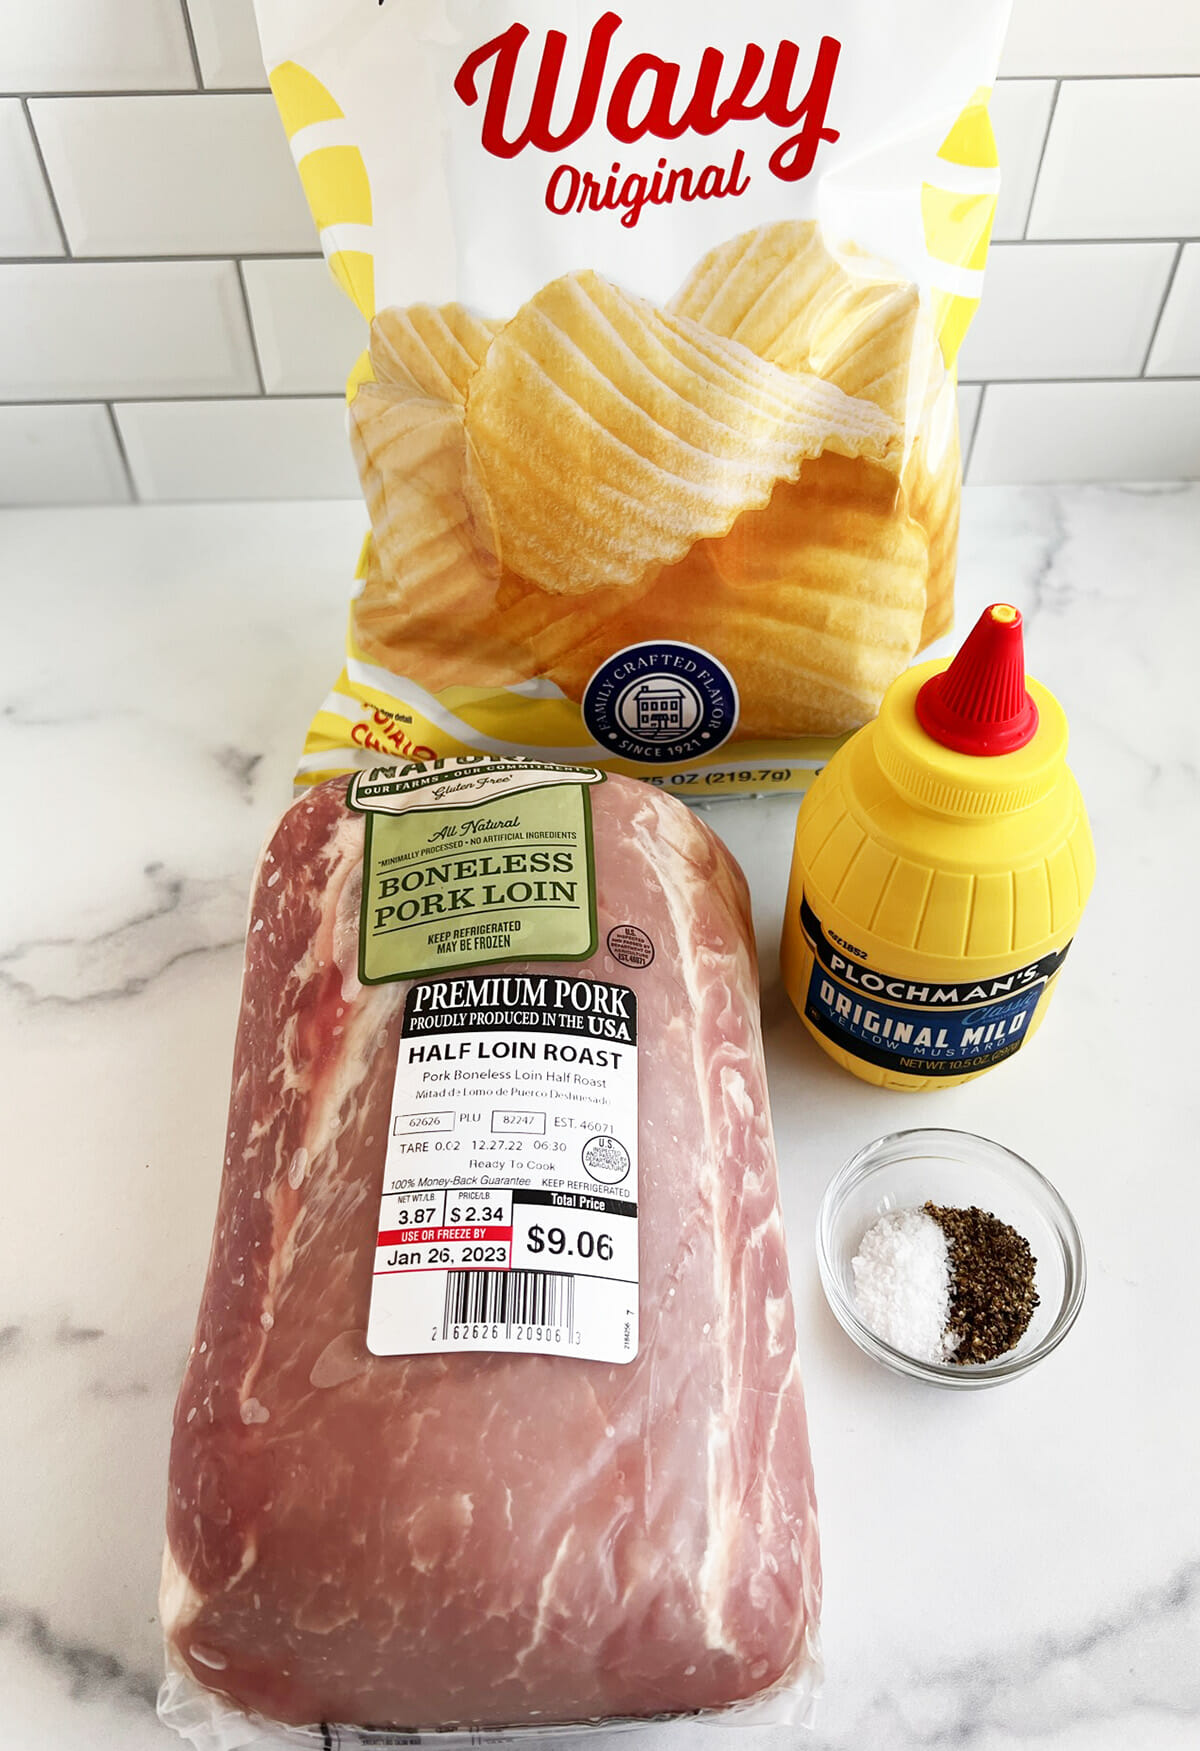 All the ingredients to make a tender, juicy pork loin roast with an amazing crust.